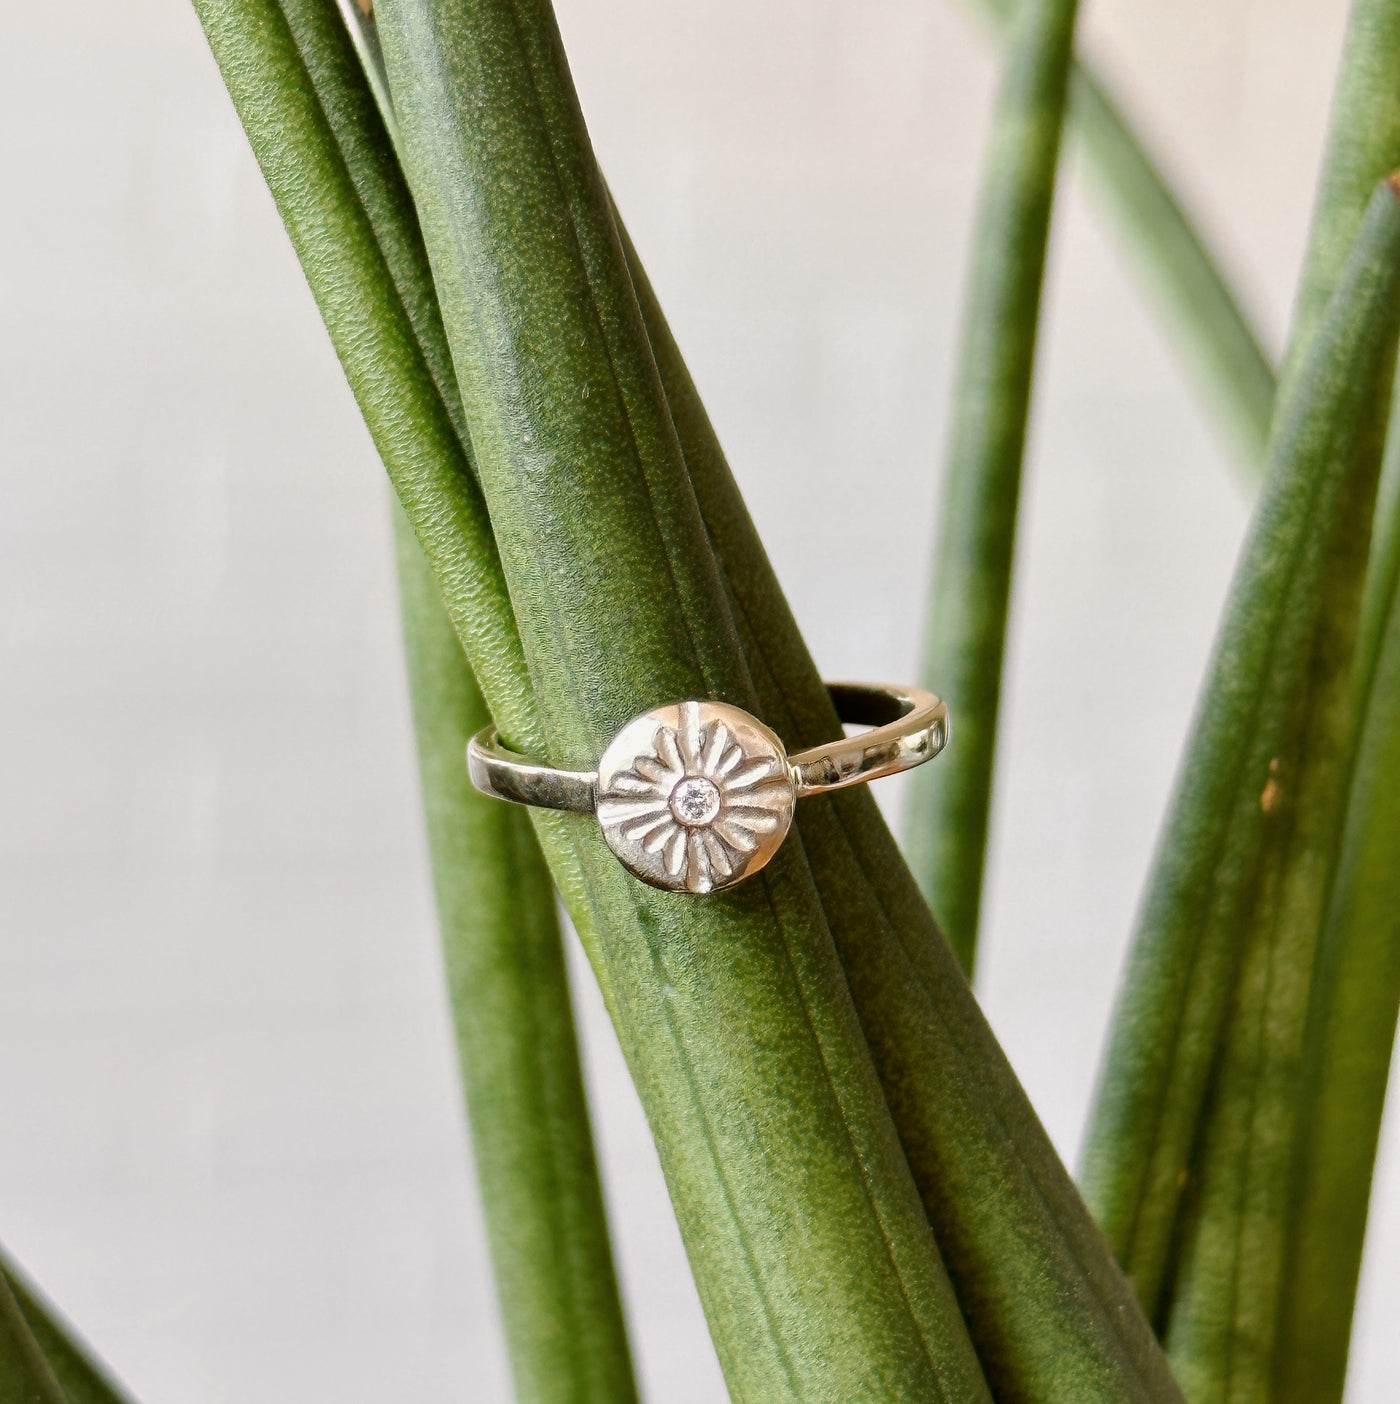 Lucia Small White Gold and Diamond Ring modeled on a plant slightly tilted to the side